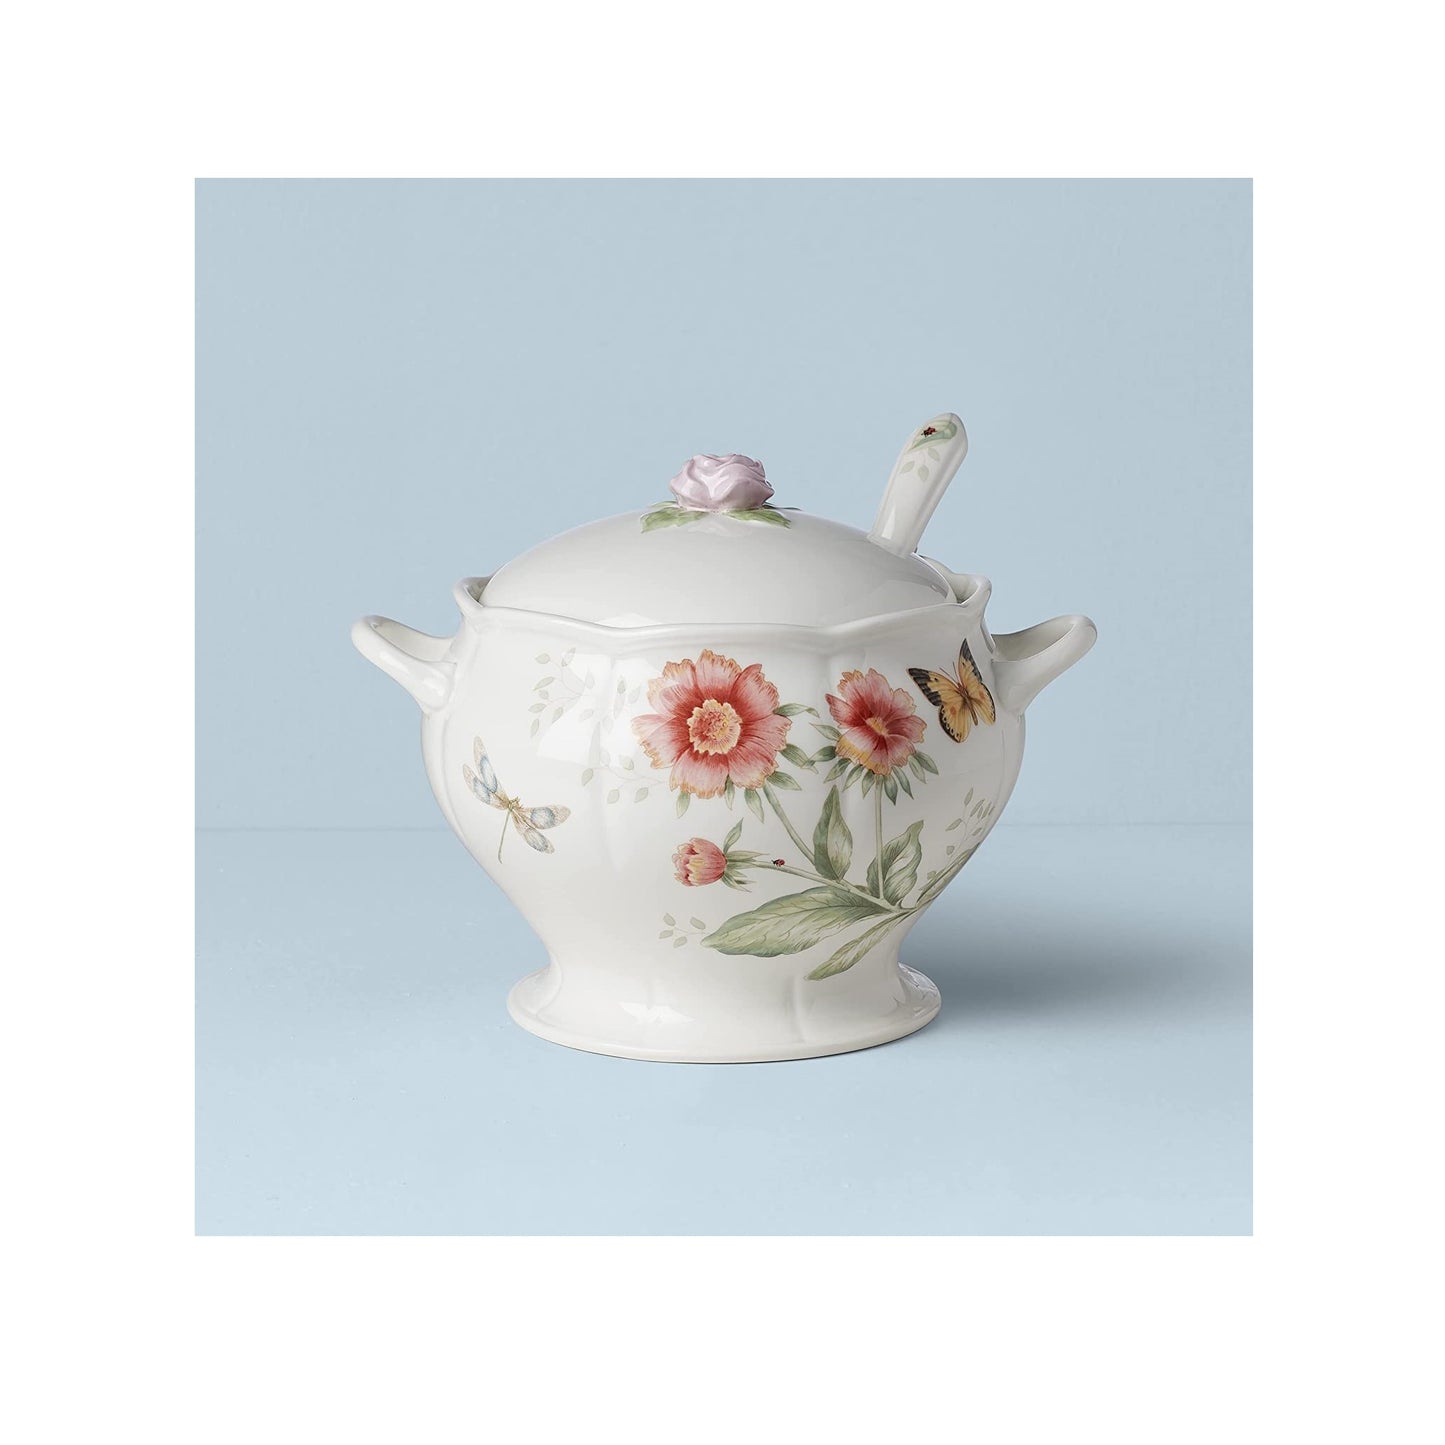 Butterfly Meadow 2 piece Tureen and Ladle Set by Lenox